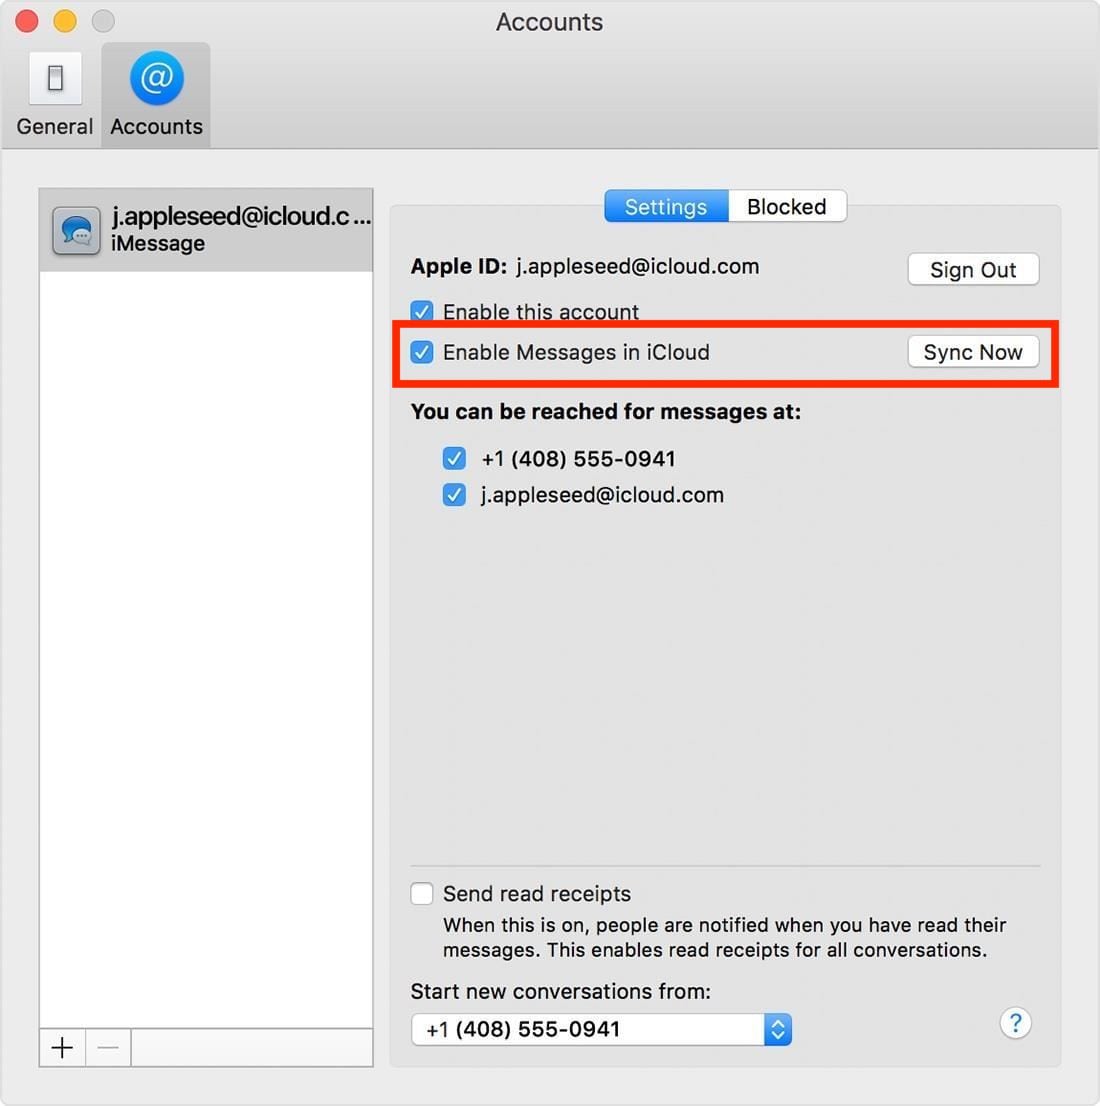 How To Enable Messages In Cloud On Macos